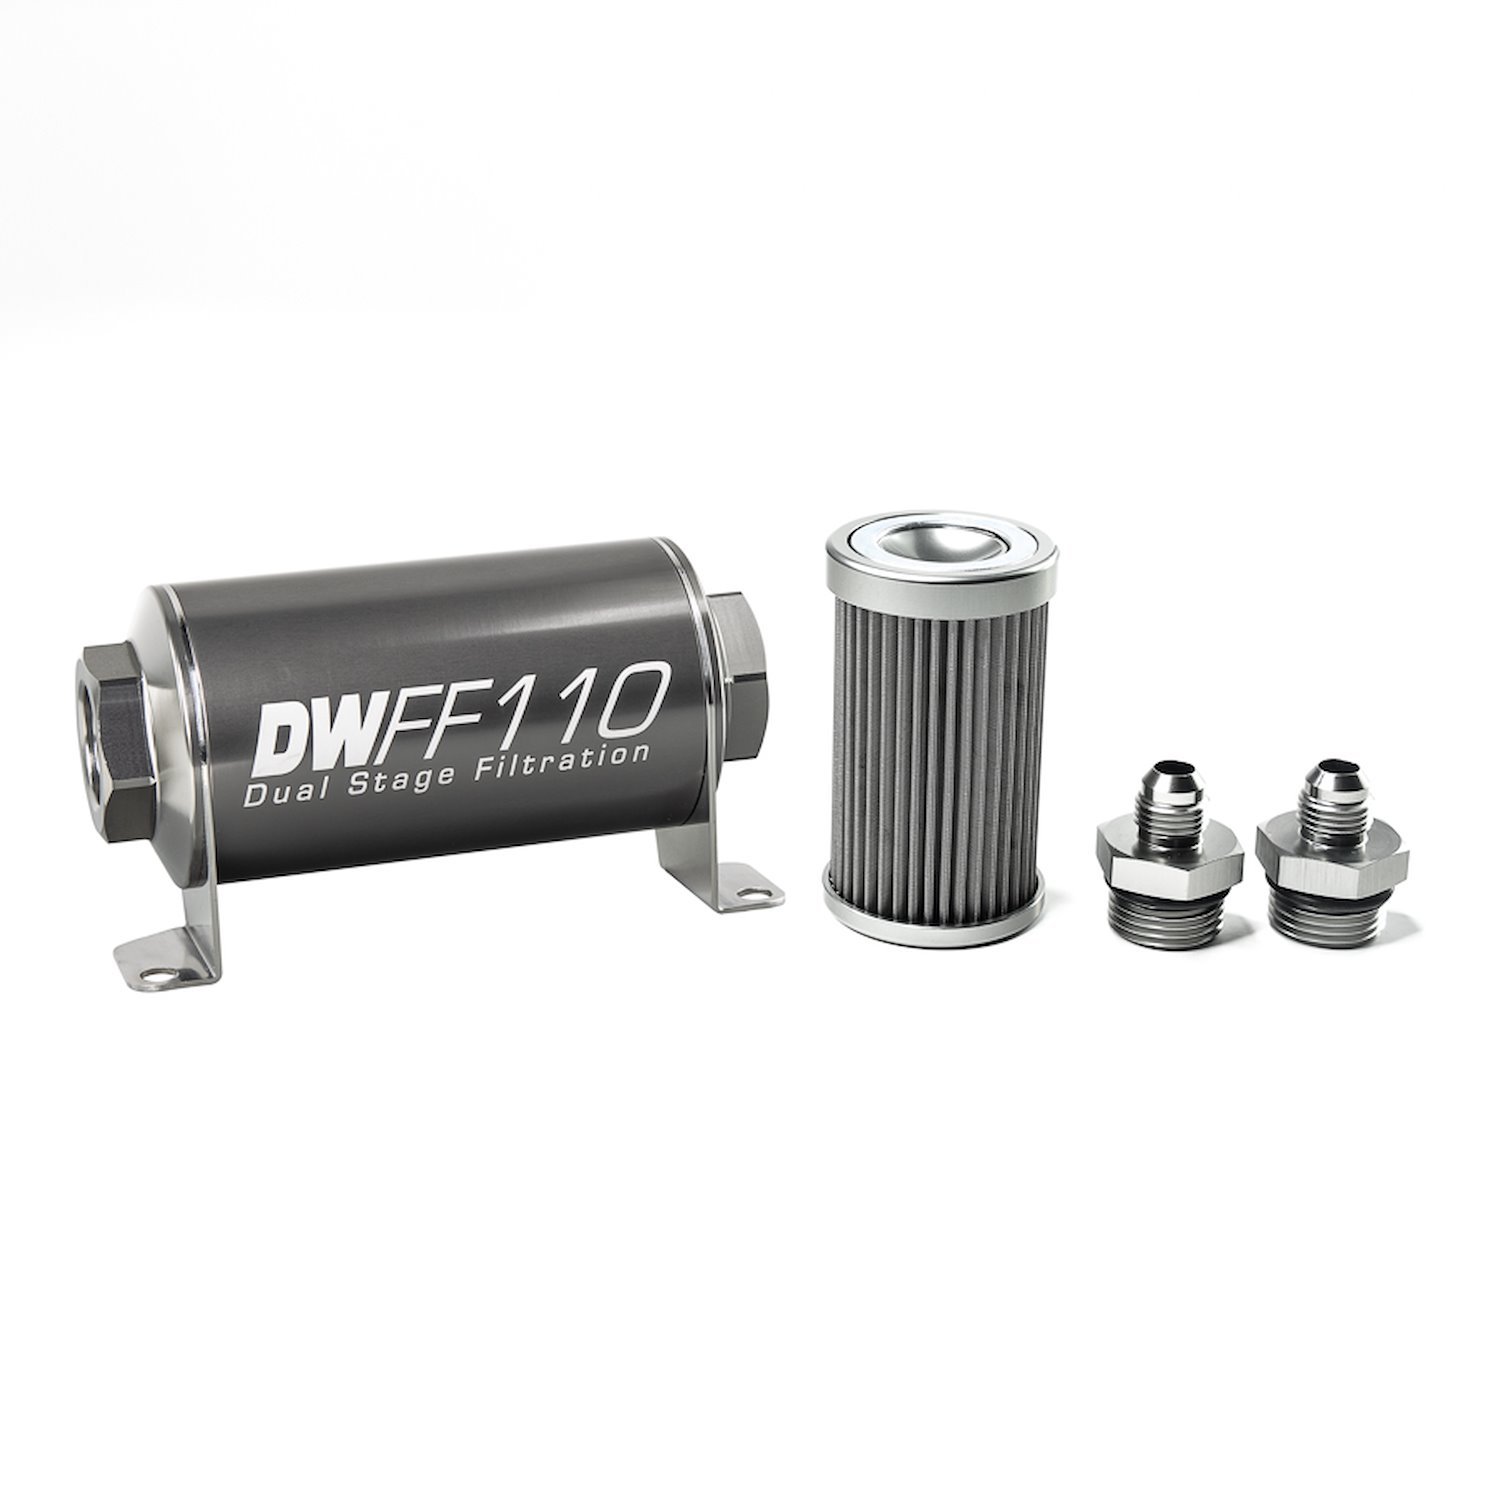 803110040K6 In-line fuel filter element and housing kit stainless steel 40 micron -6AN 110mm. Universal